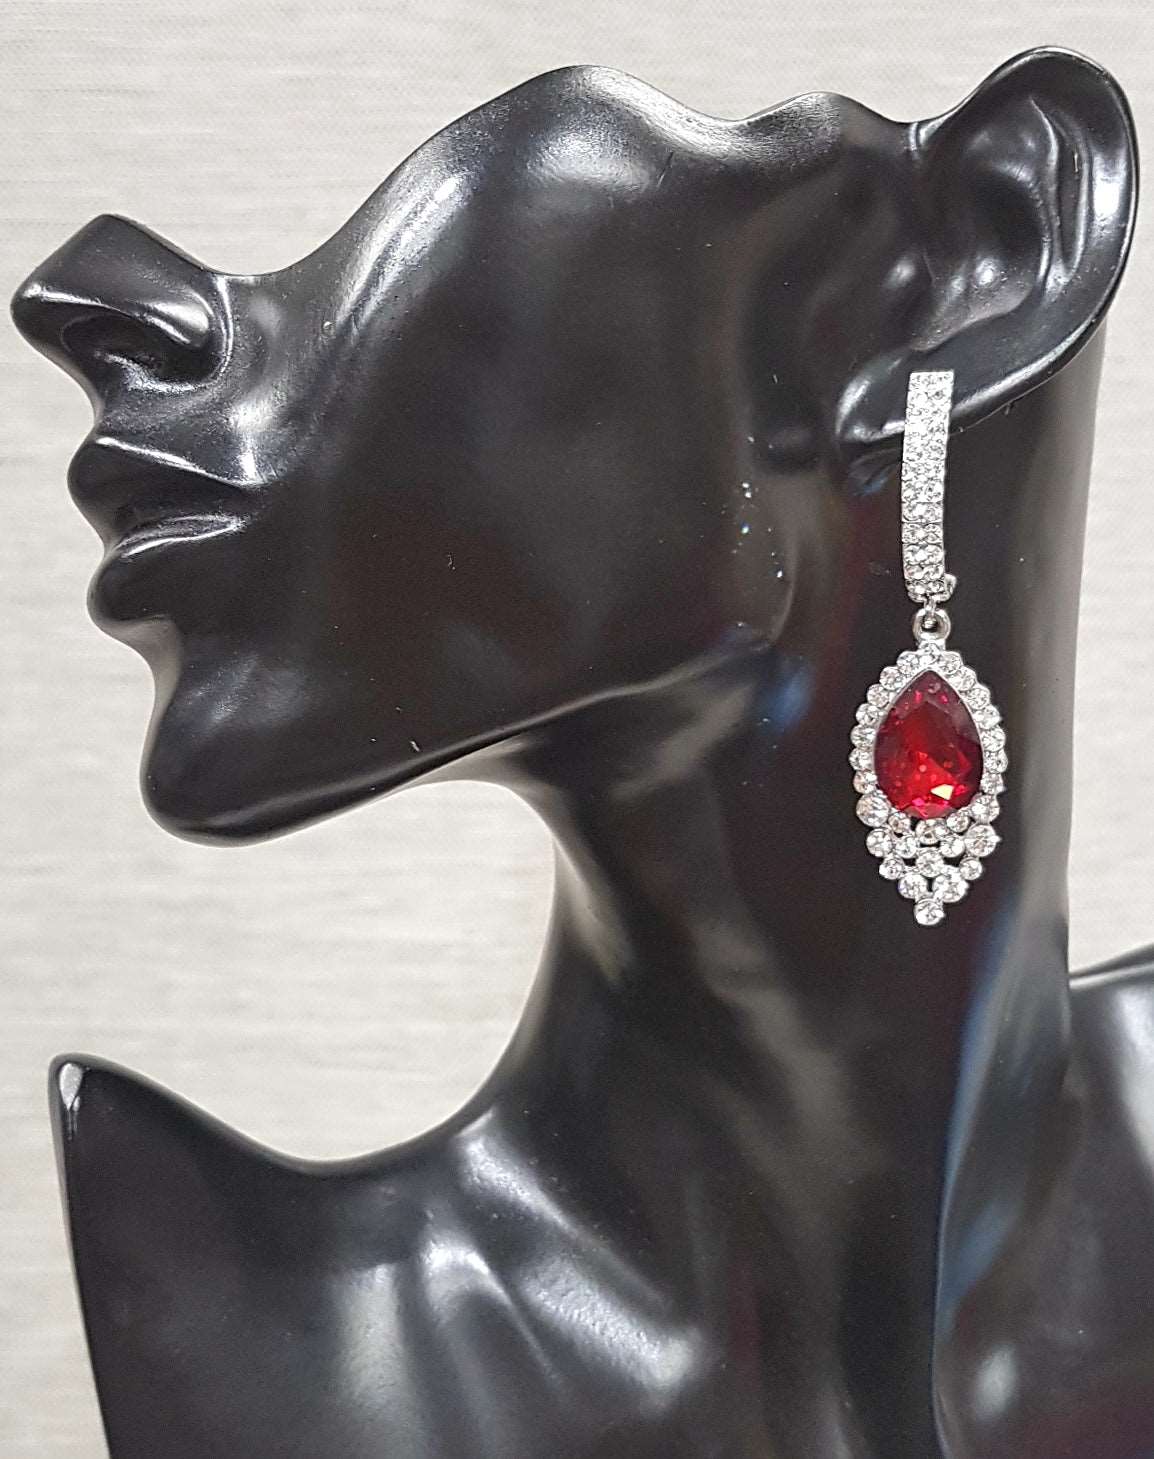 Elegant drop earrings with white and red stones